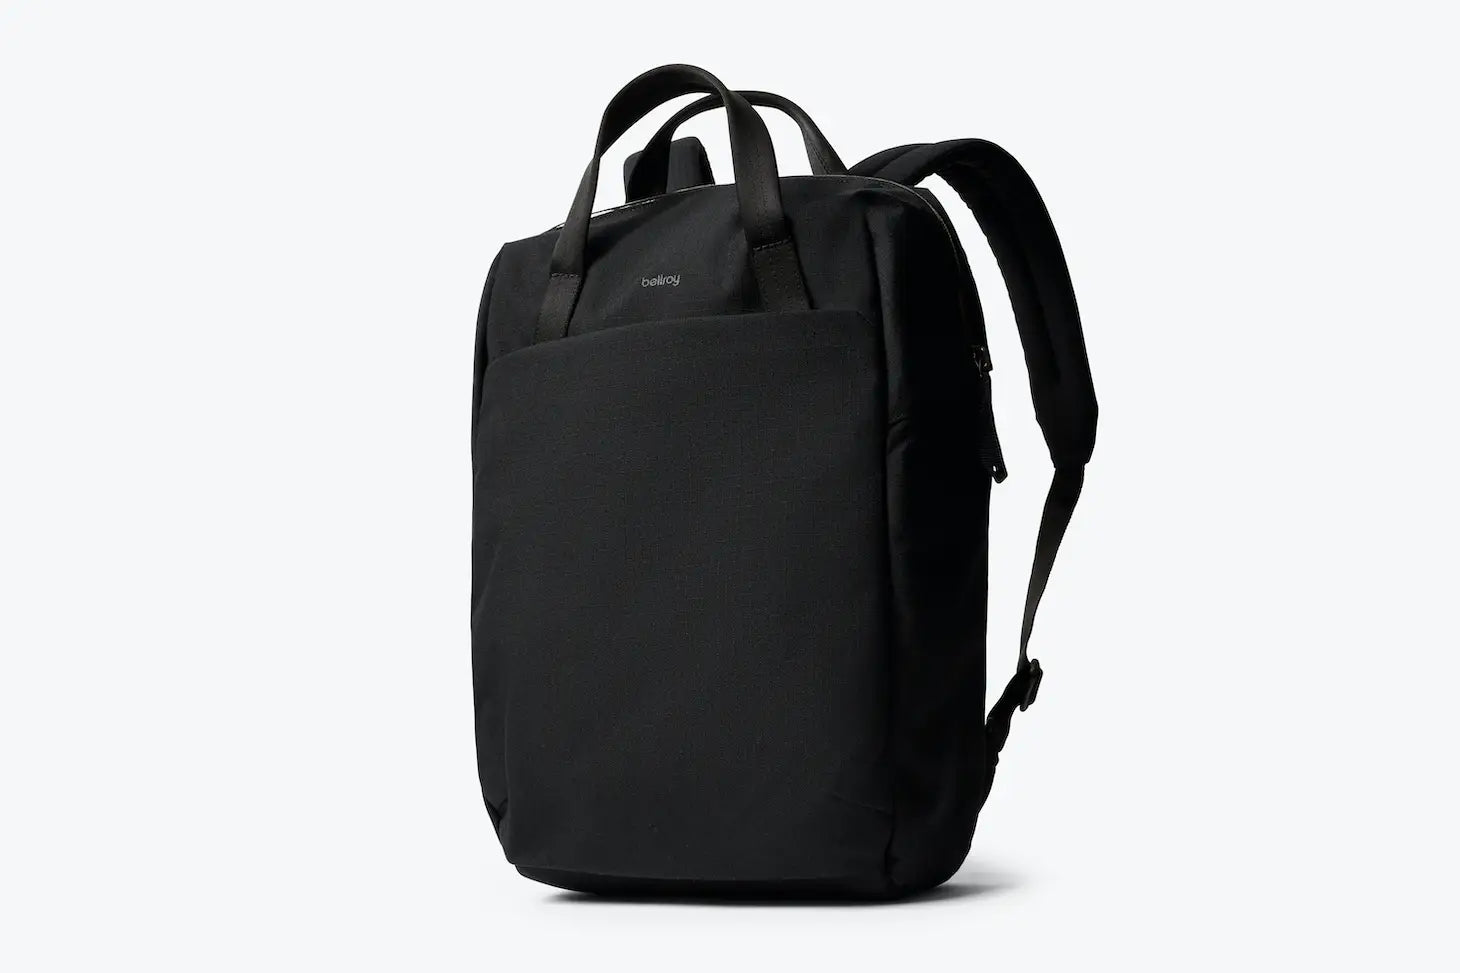 Via Workpack - Business and Travel Laptop Bag